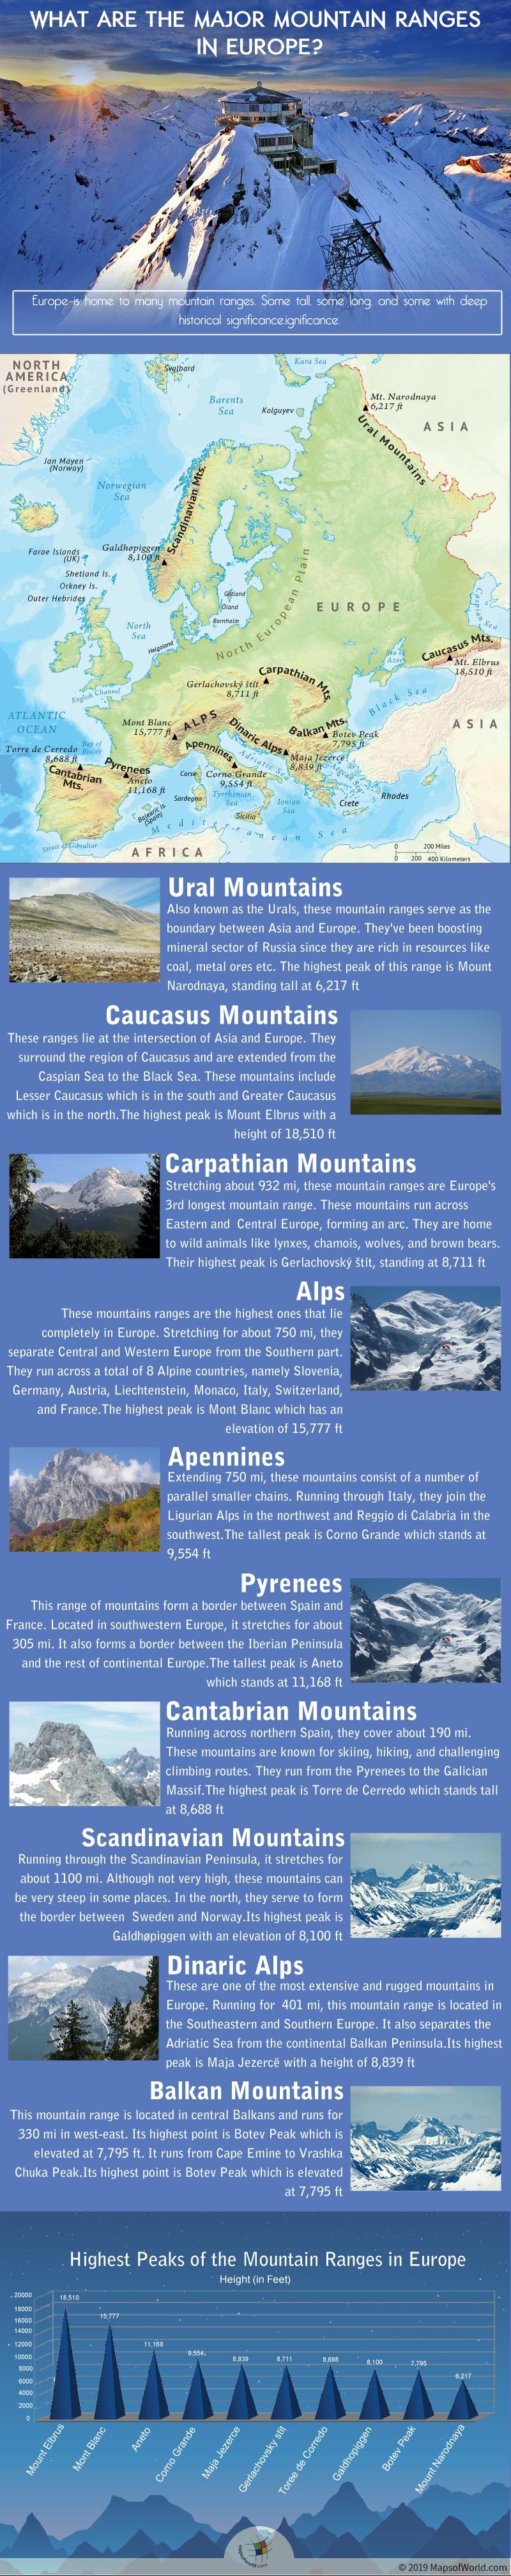 Infographic Giving Details of Mountain Ranges of Europe